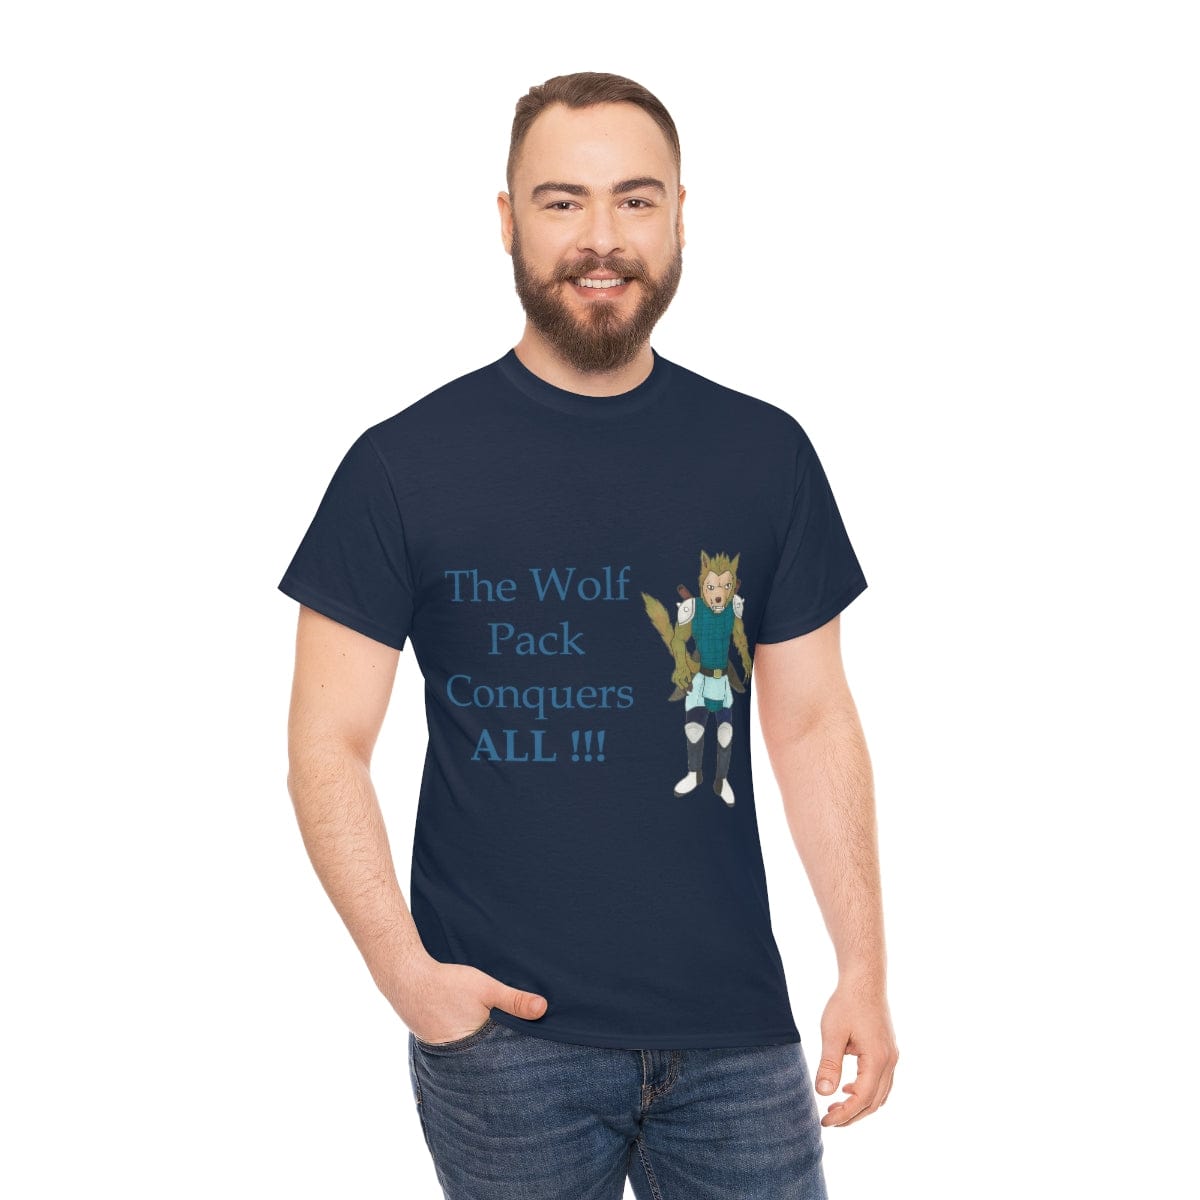 Wolf Pack Conquers All!!! T-shirt